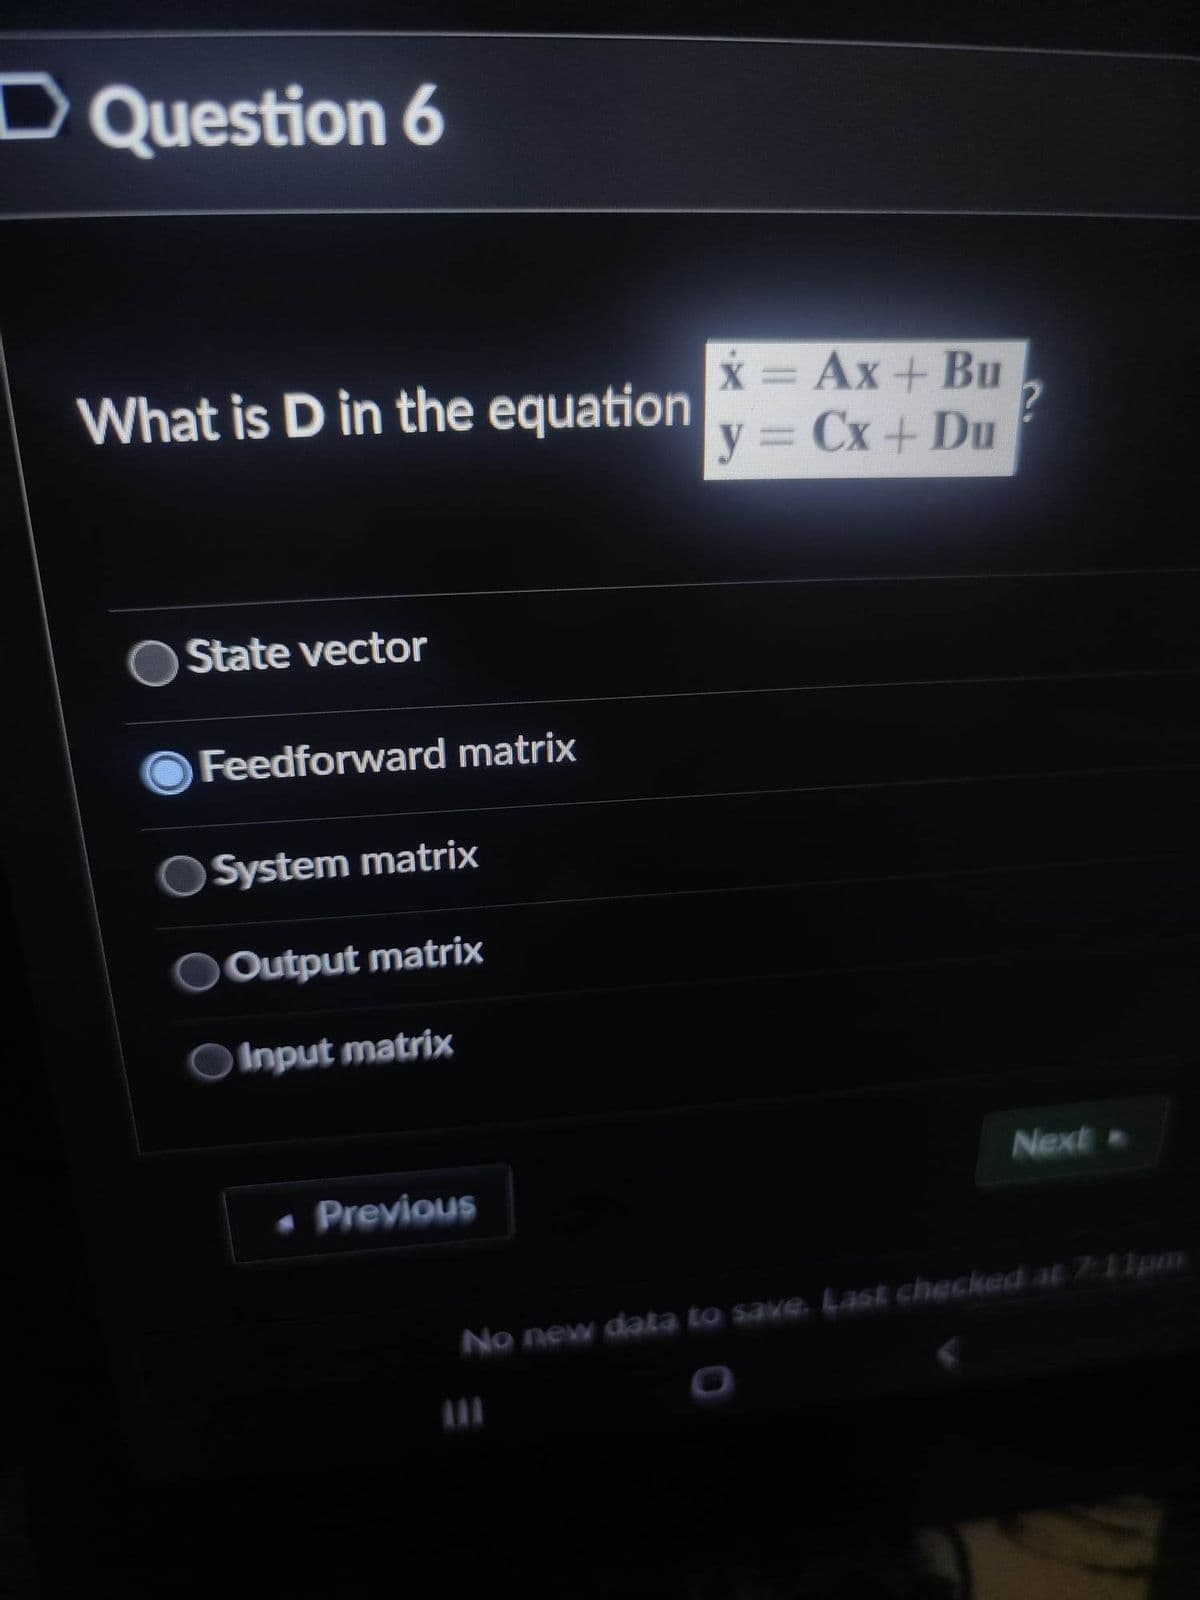 D Question 6
What is D in the equation
State vector
Feedforward matrix
System matrix
Output matrix
Input matrix
• Previous
x = Ax+ Bu
y = Cx+ Du
Next
No new data to save. Last checked at 7:11pm
111